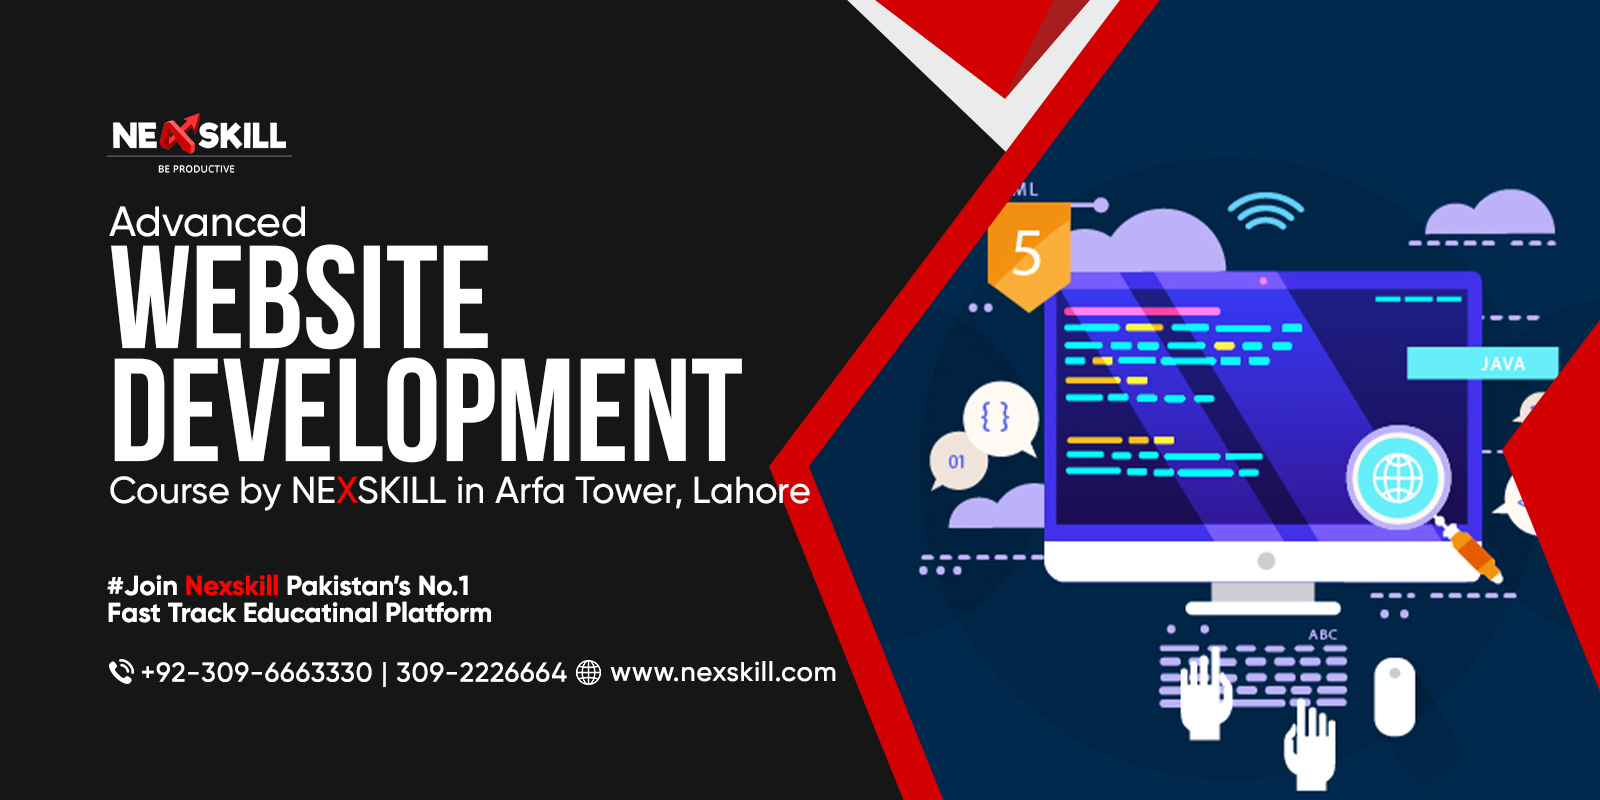 Advanced Website Development Course by Nexskill in Arfa Tower, Lahore